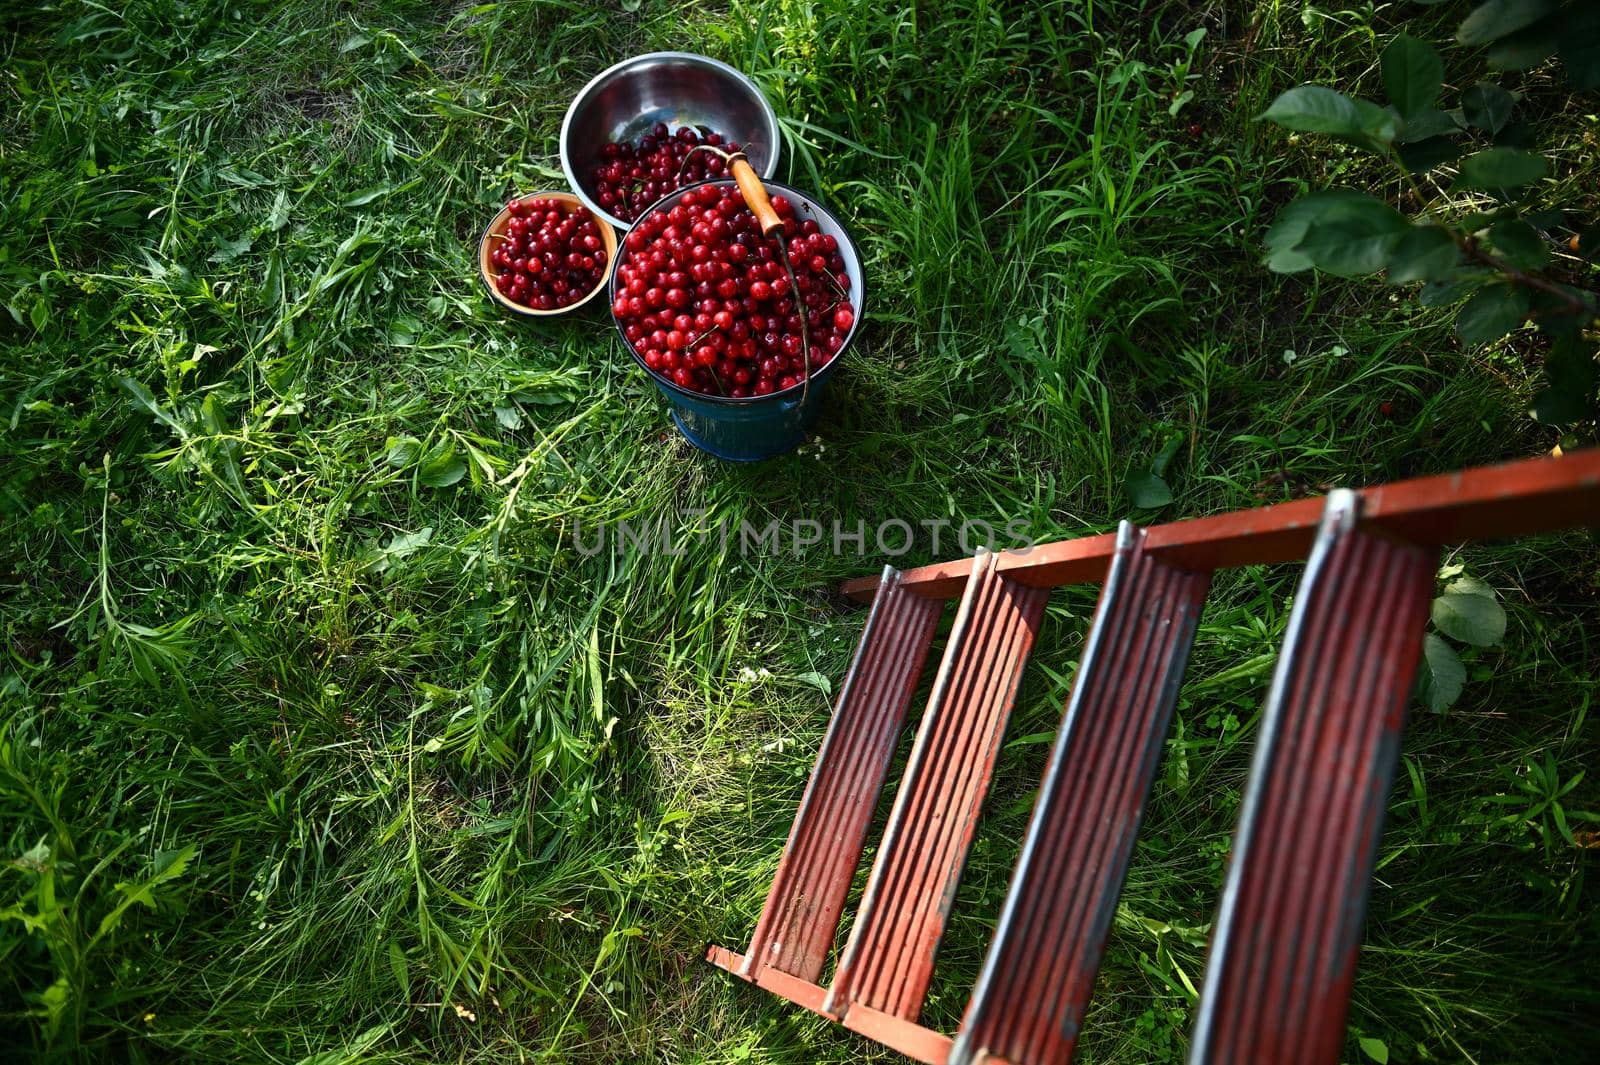 High angle view of stepladder on harvest cherries in metal blue bucket and bowls, lying on a green grass in orchard by artgf